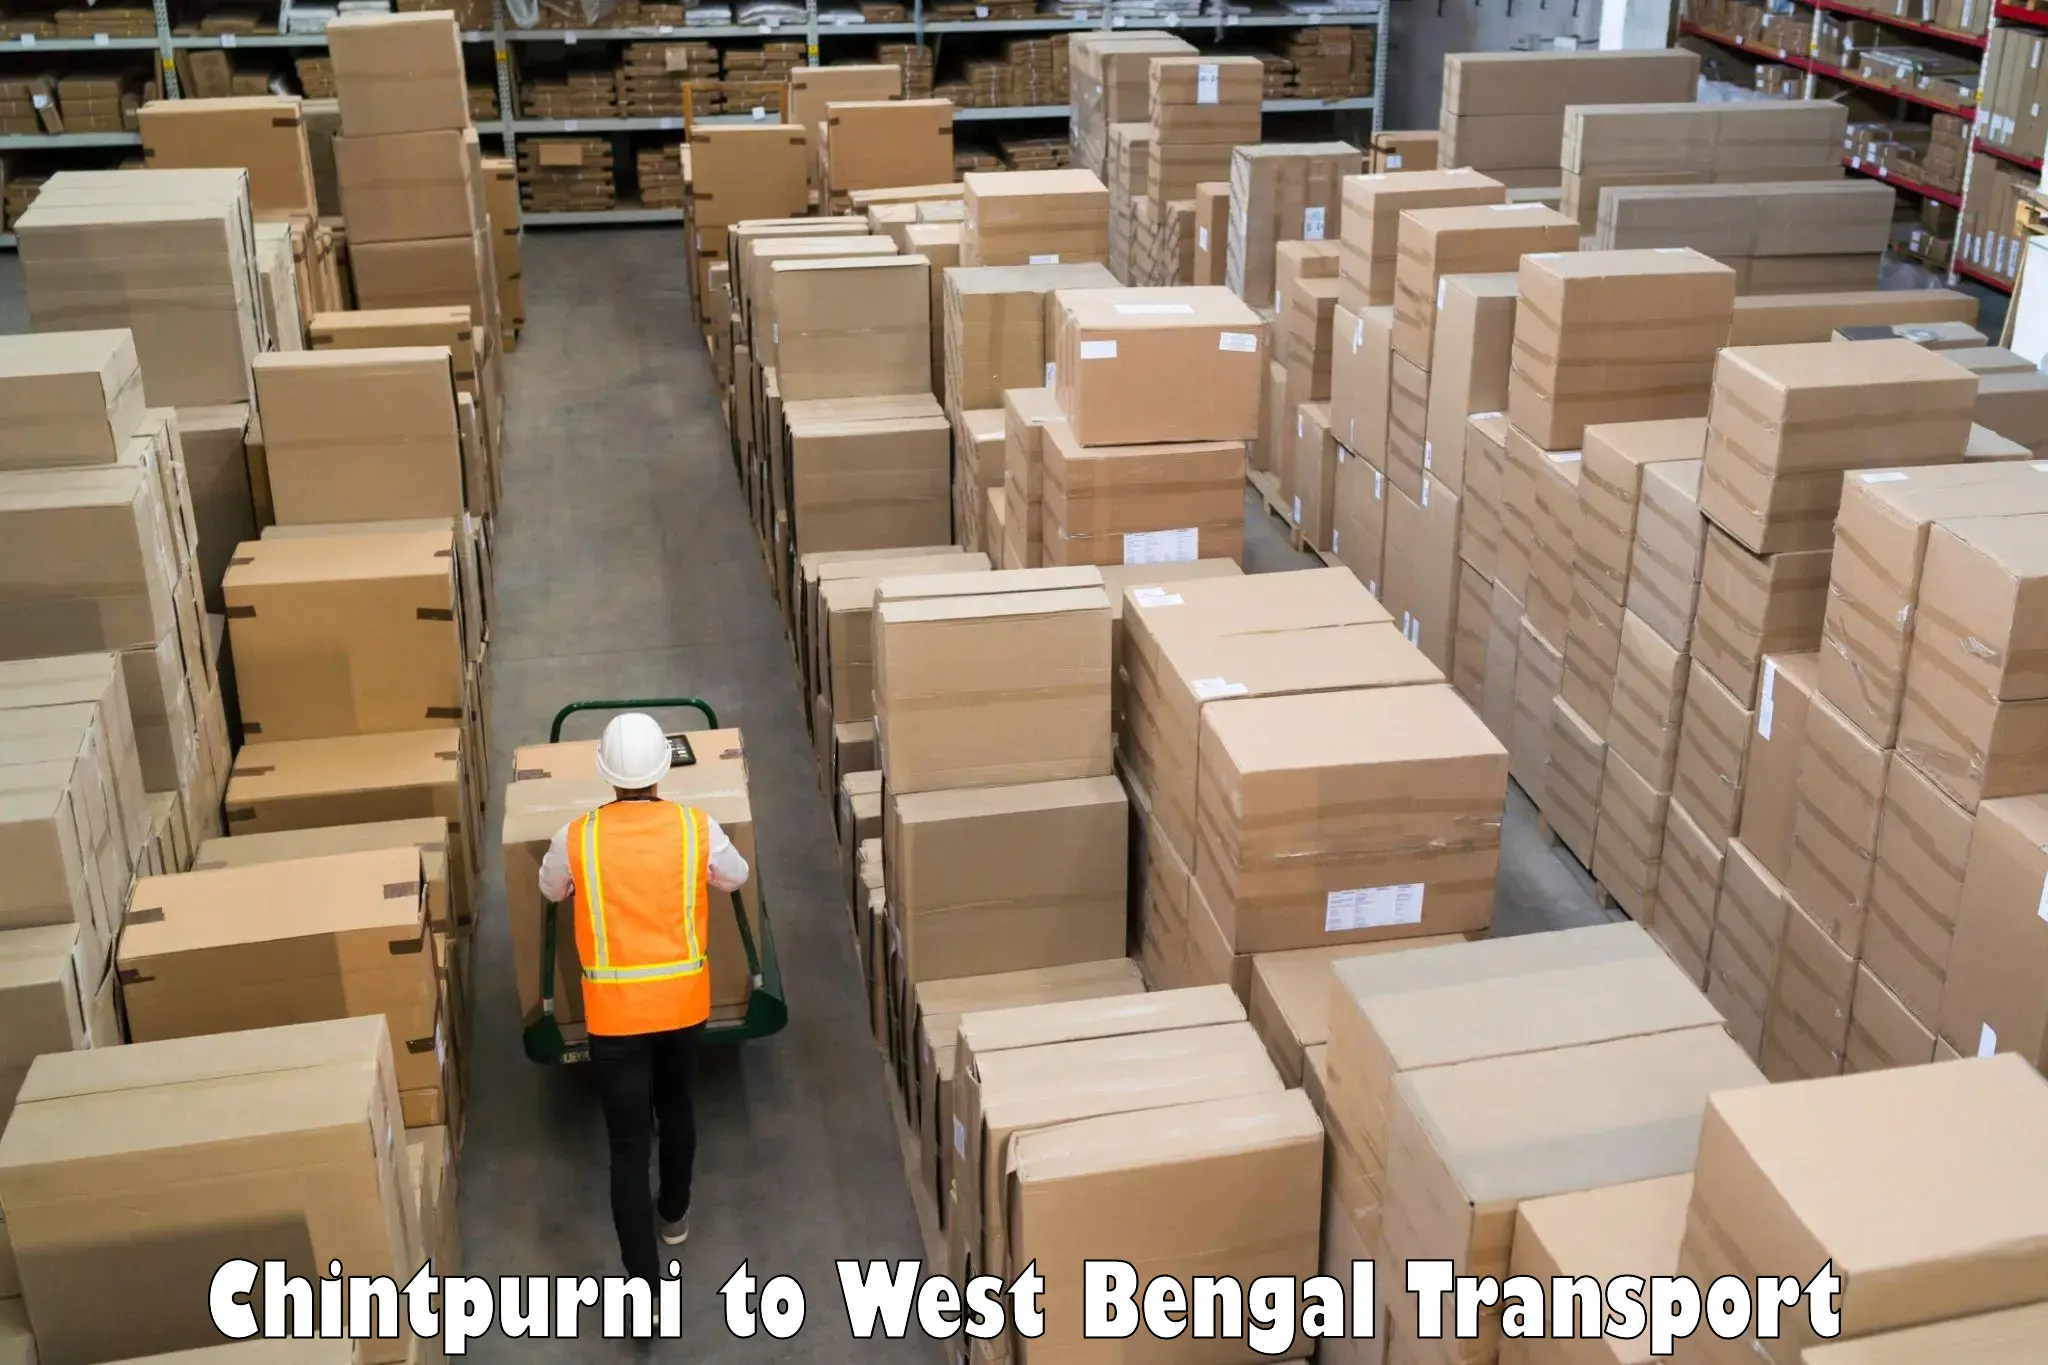 Cargo train transport services in Chintpurni to Baharampur